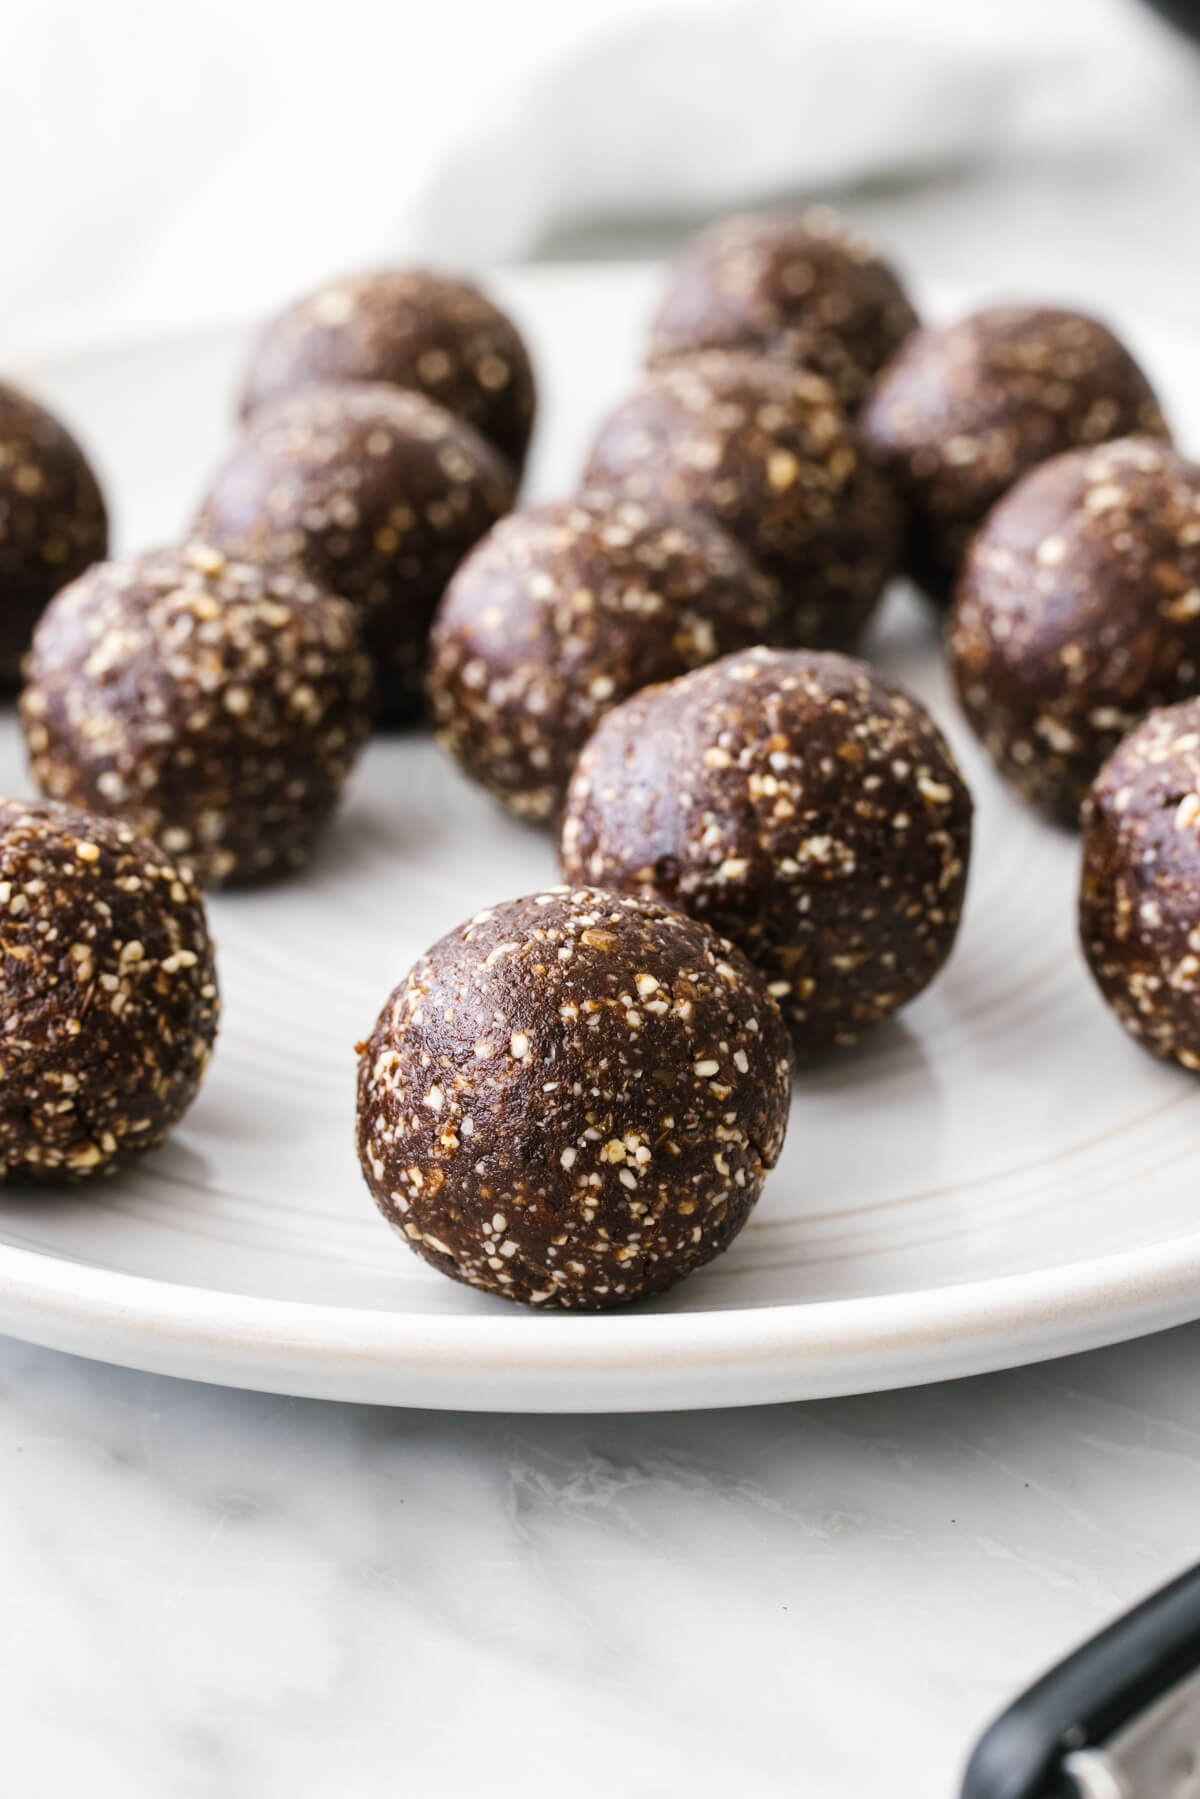 A plate of mint chocolate energy balls